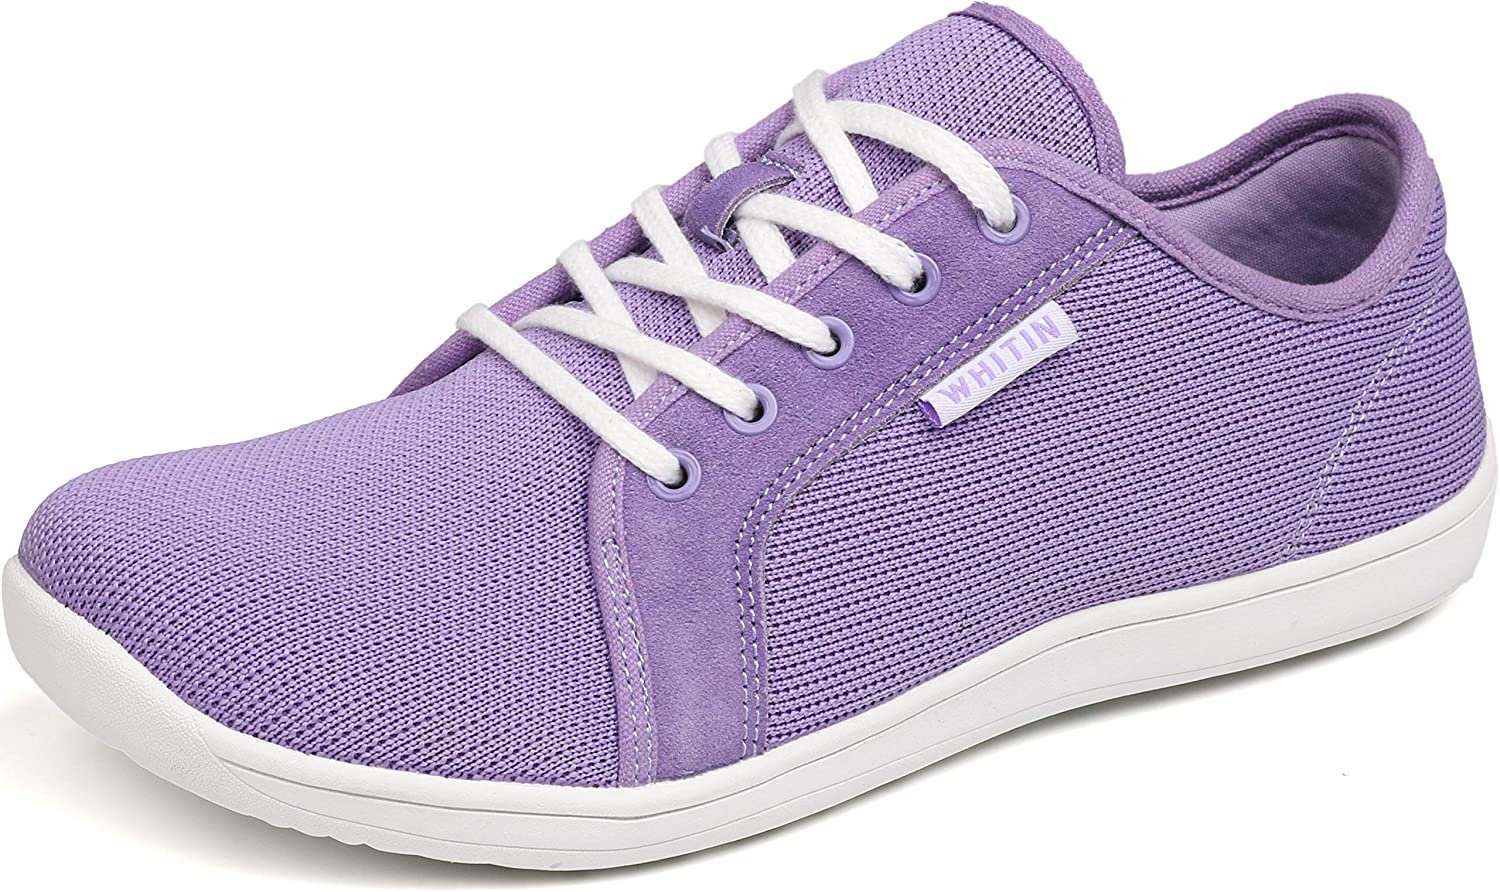 WHITIN Women's Knit Barefoot Minimalist Sneakers Lace Up Wide Fit